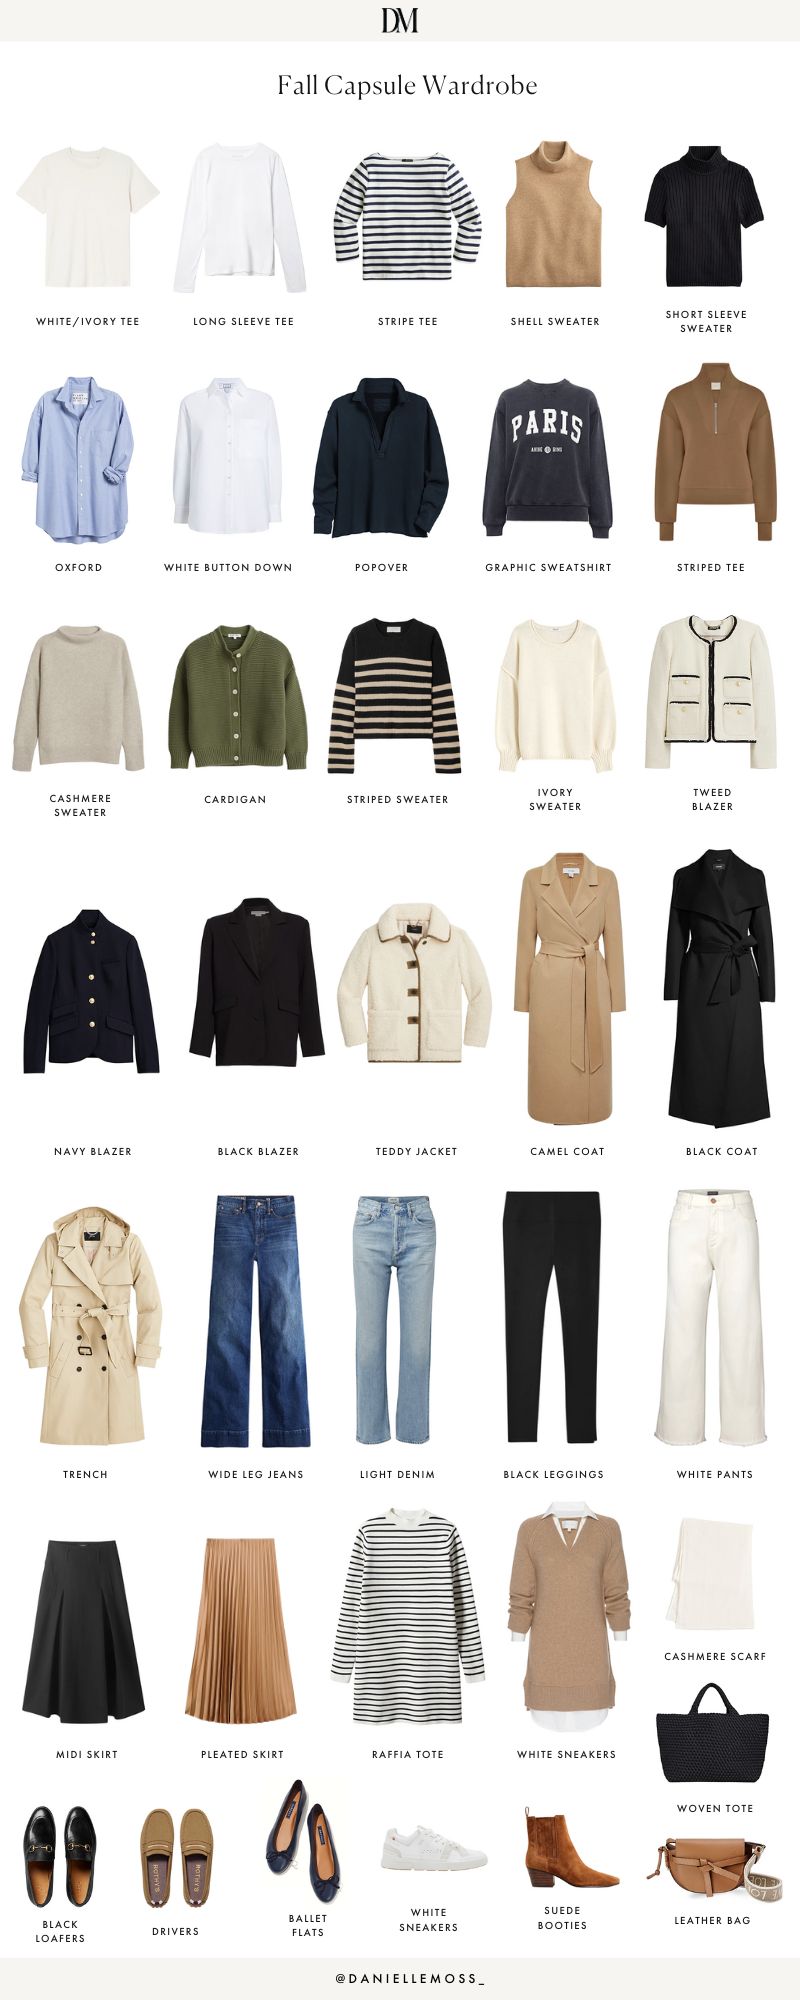 H&M Haul: Top 10 Fall Essentials for your Closet